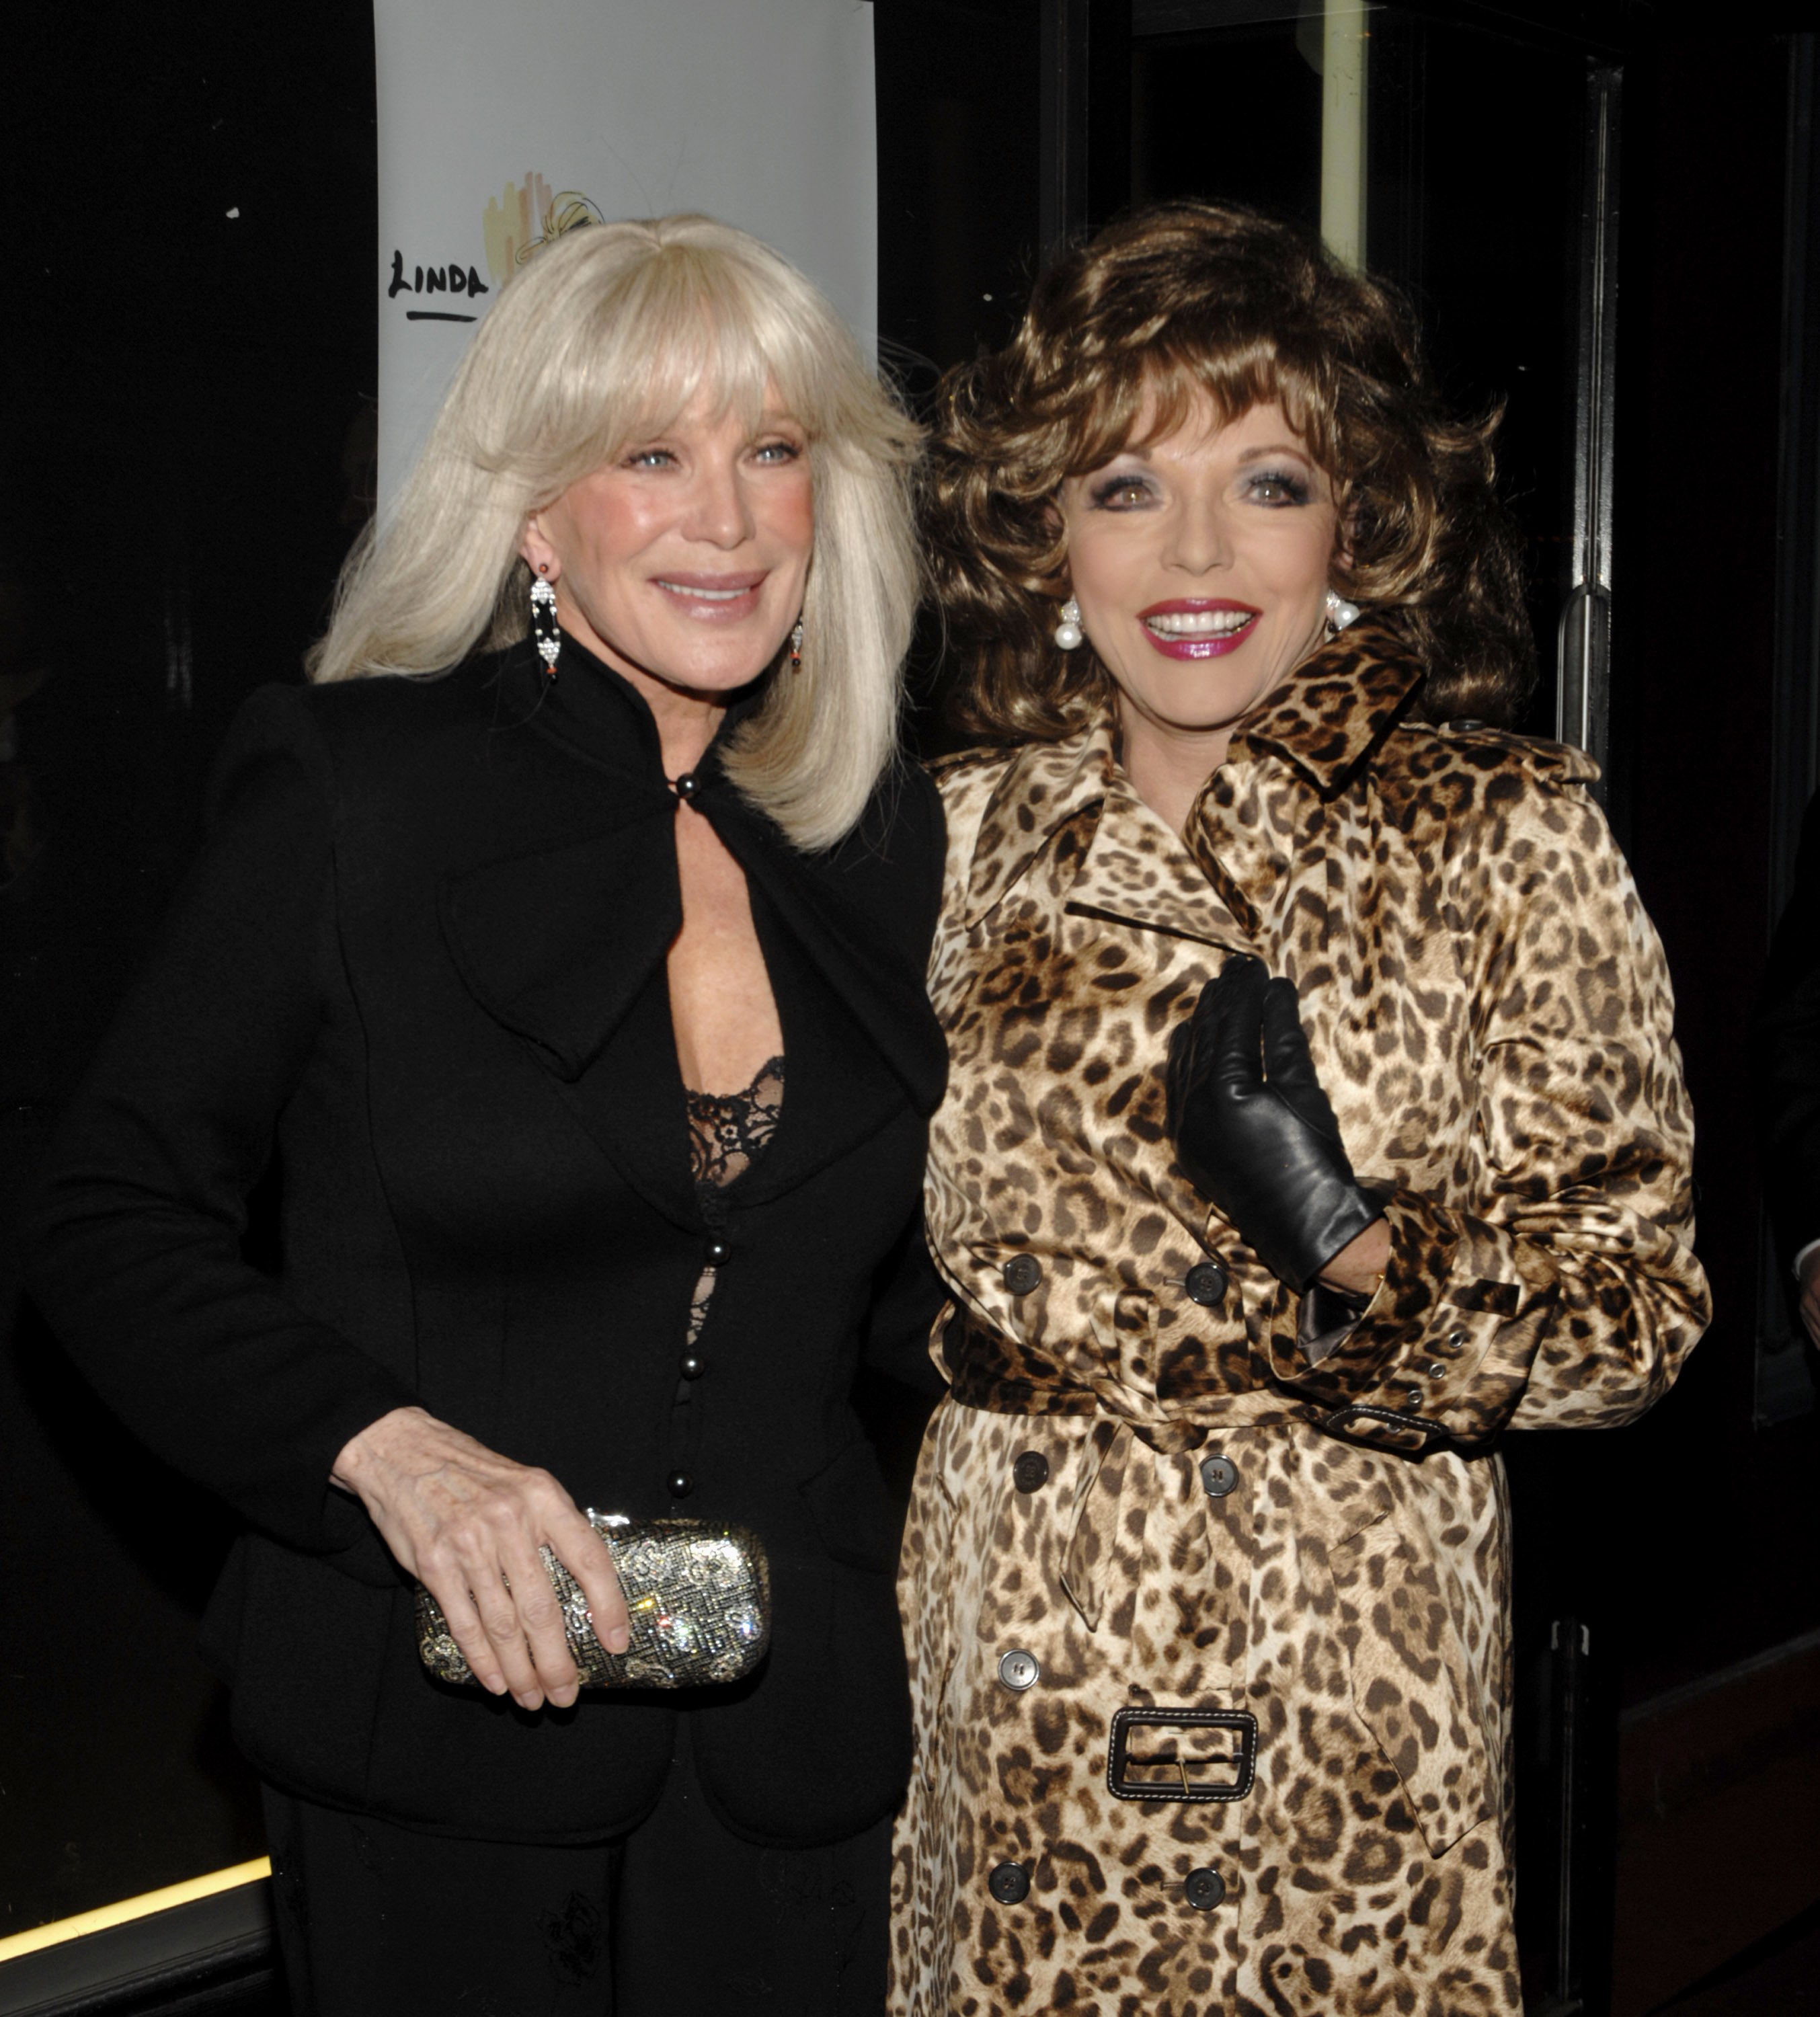 Linda Evans and Joan Collins at their premiere performance in "Legends" on January 16, 2007, in Beverly Hills, California | Source: Getty Images